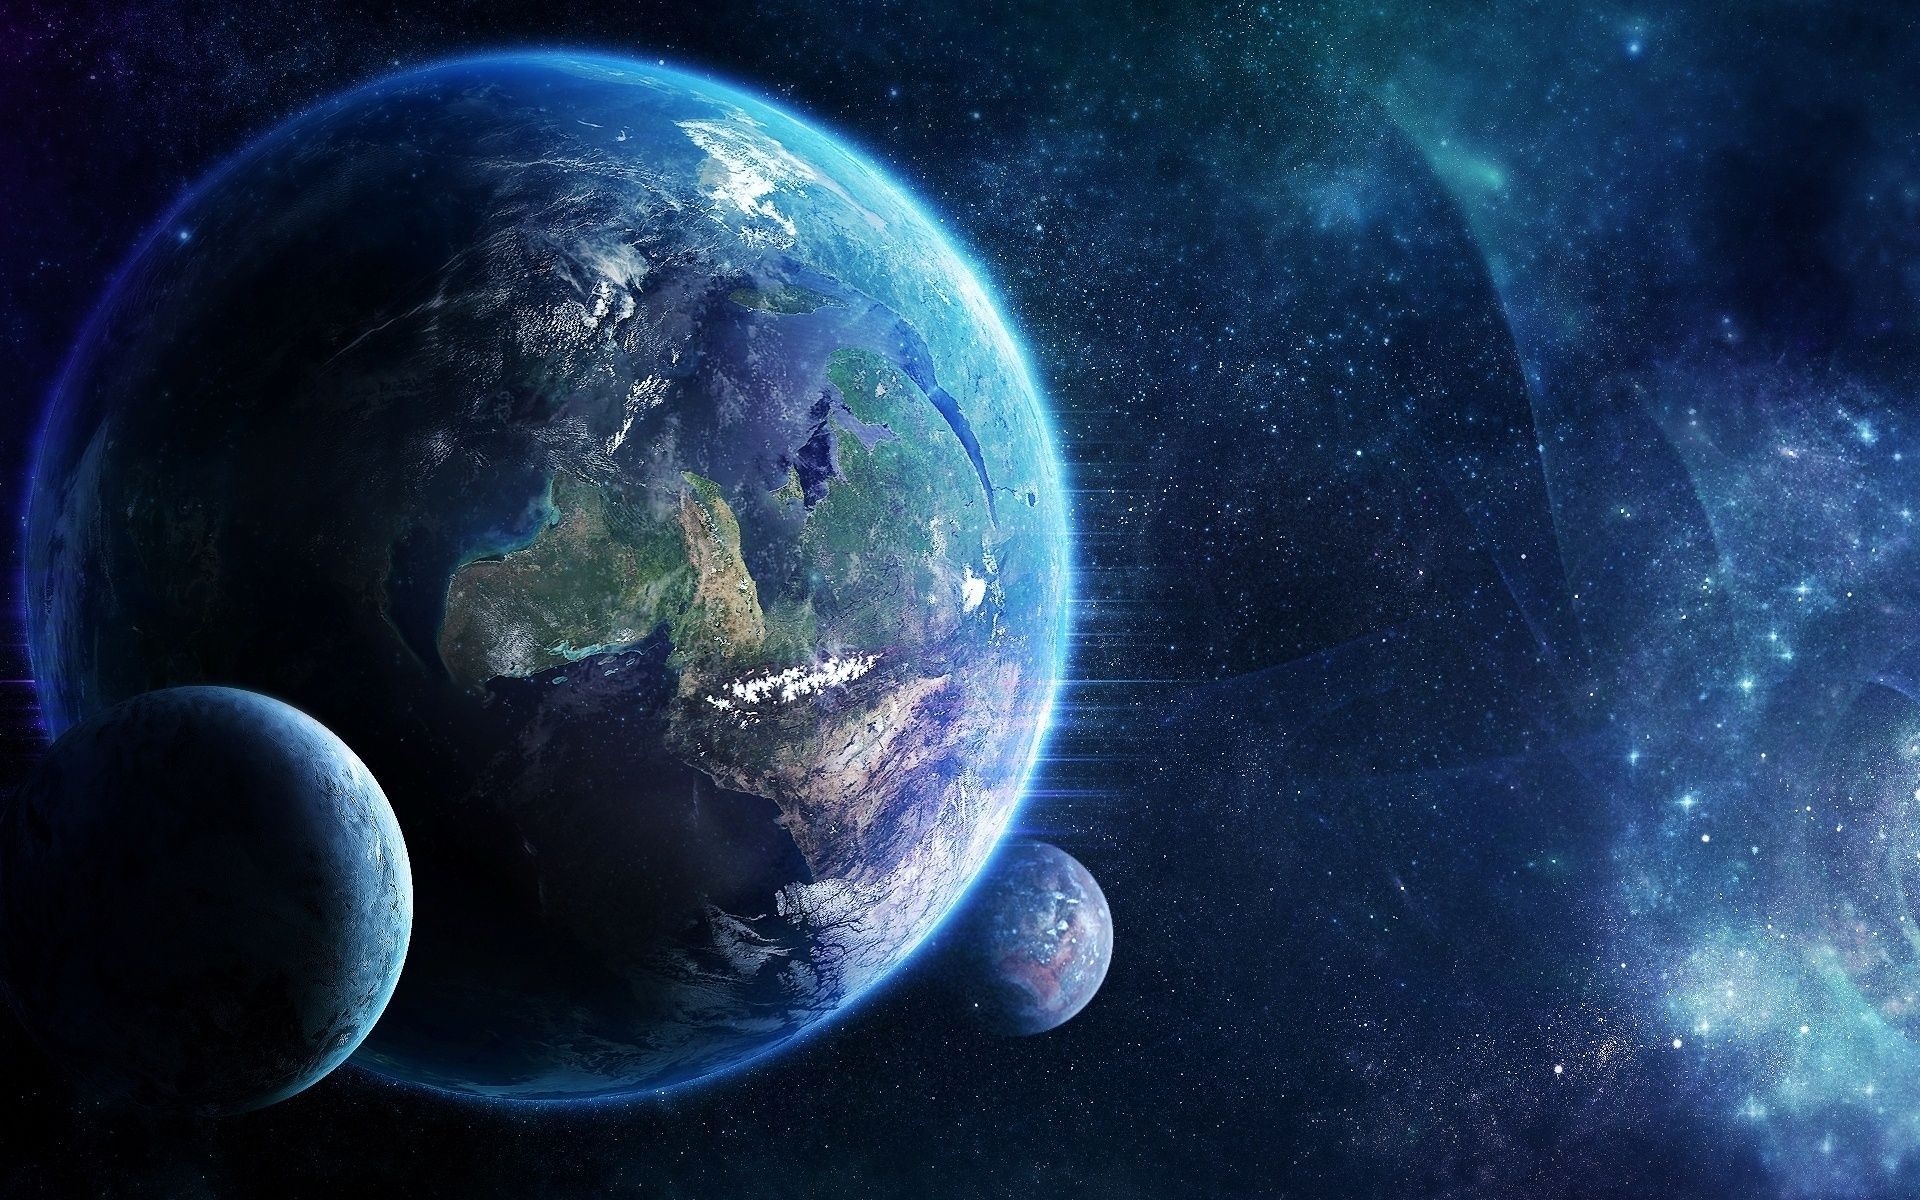 Earth Moving In Space With Small Planets Picture Of Earth